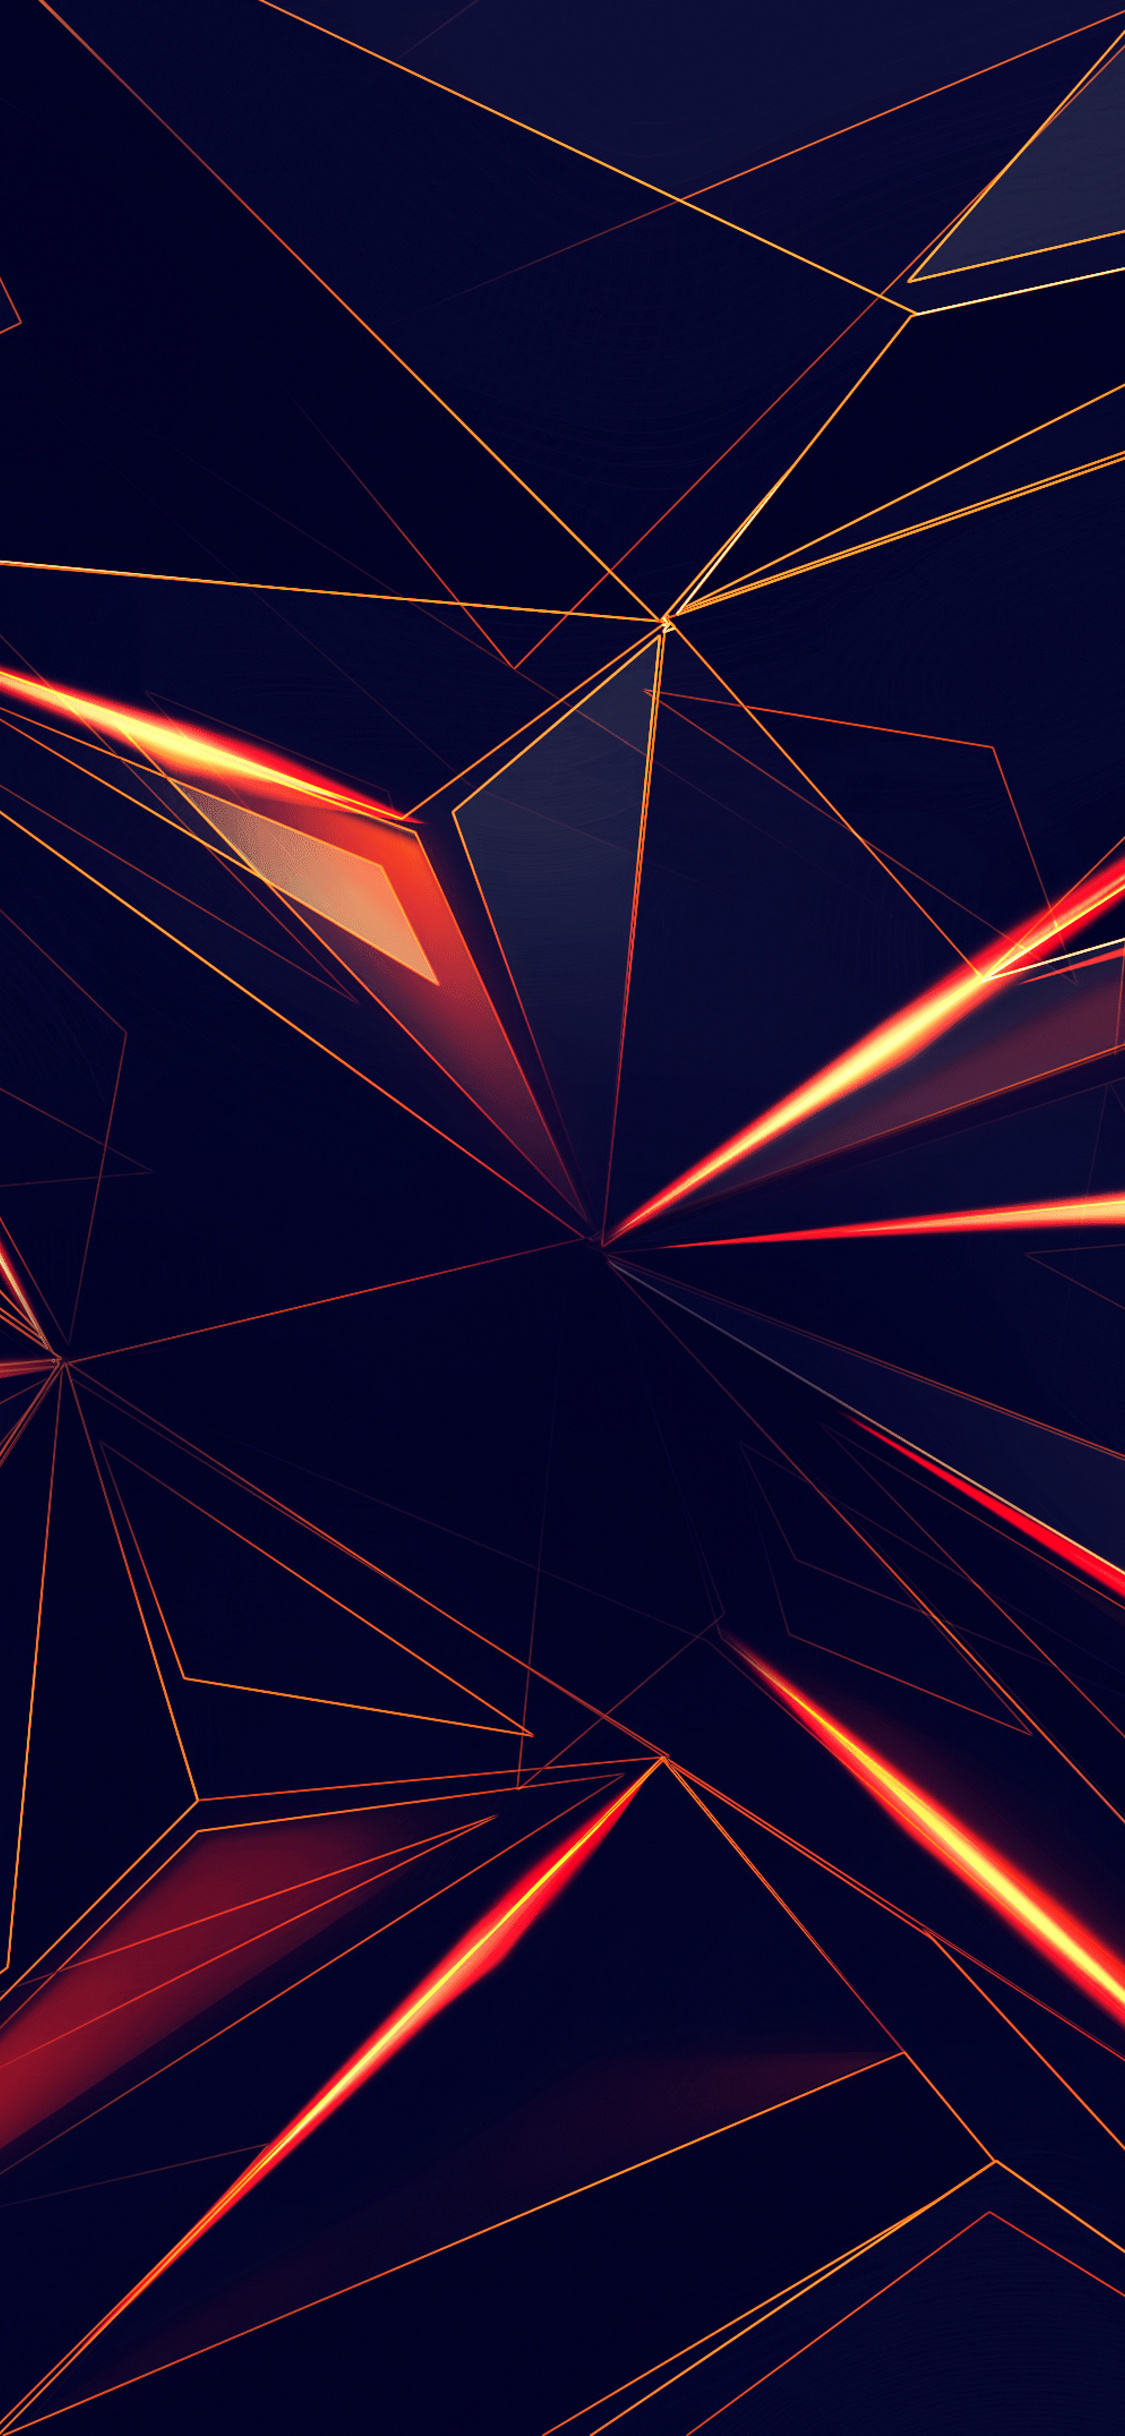 3d-shapes-abstract-lines-4k-nh.jpg